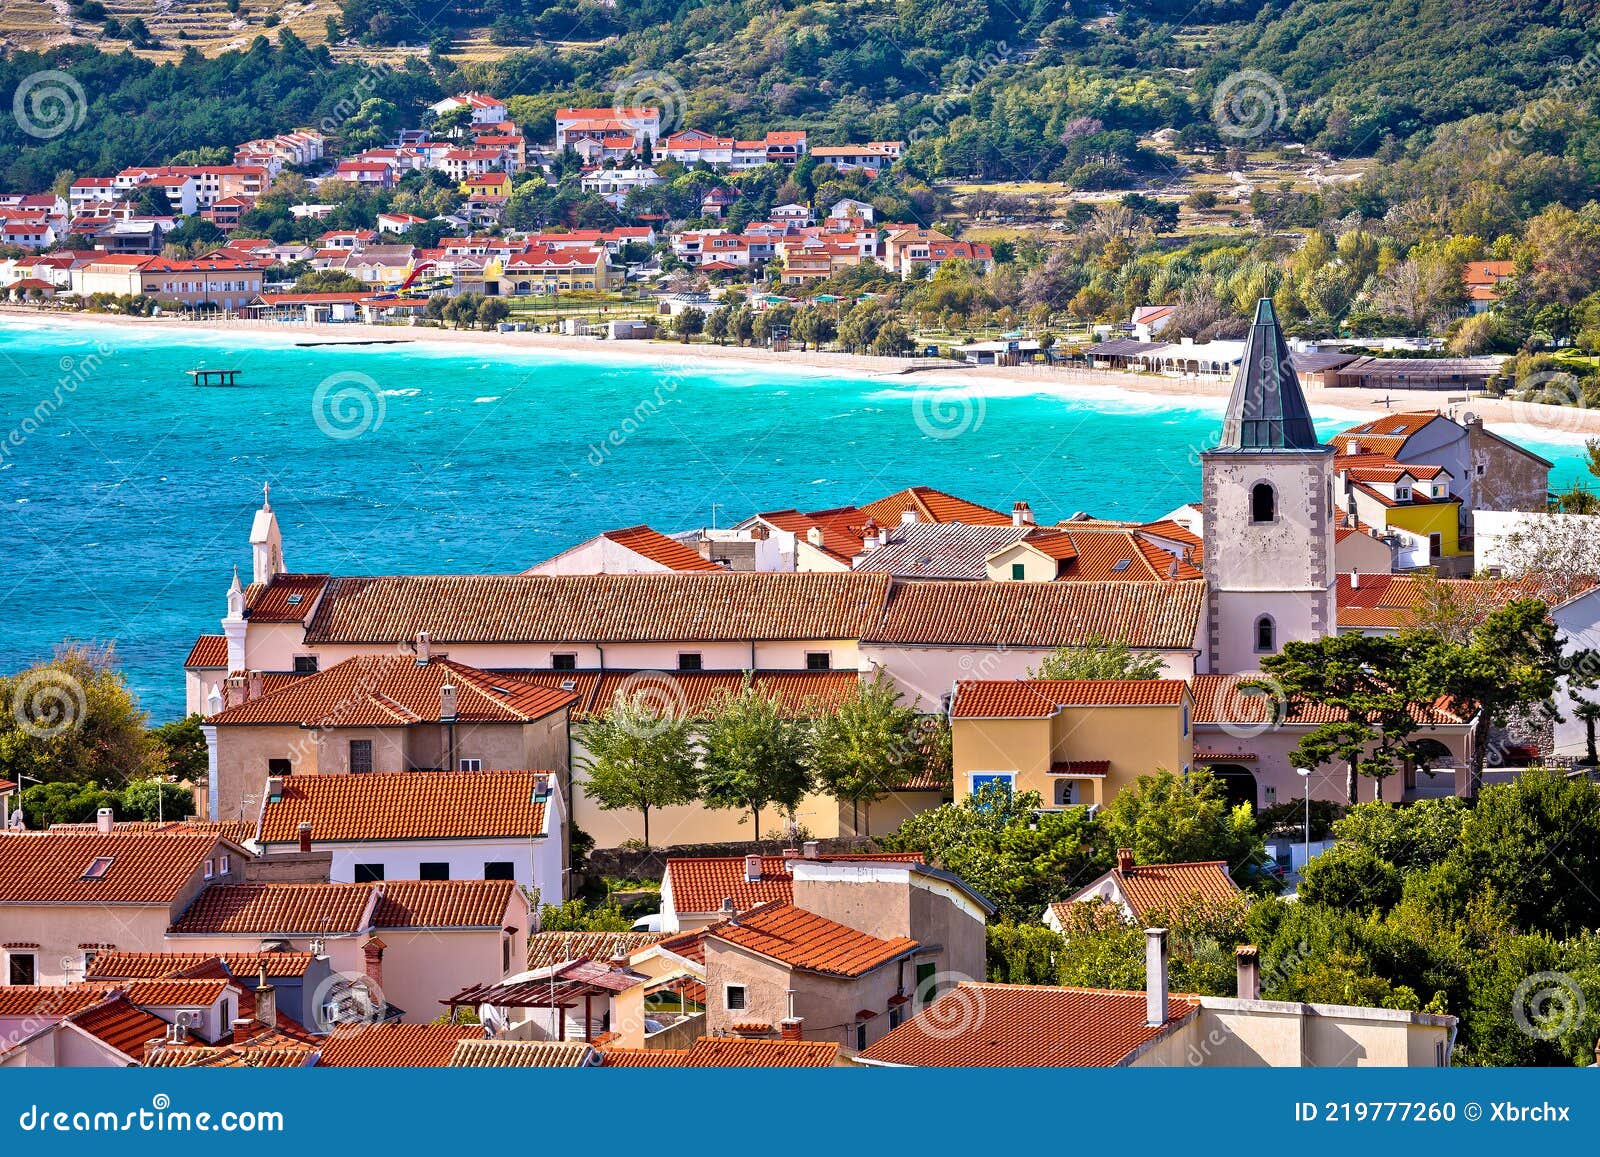 adriatic town of baska idyllic landscape view from the hill